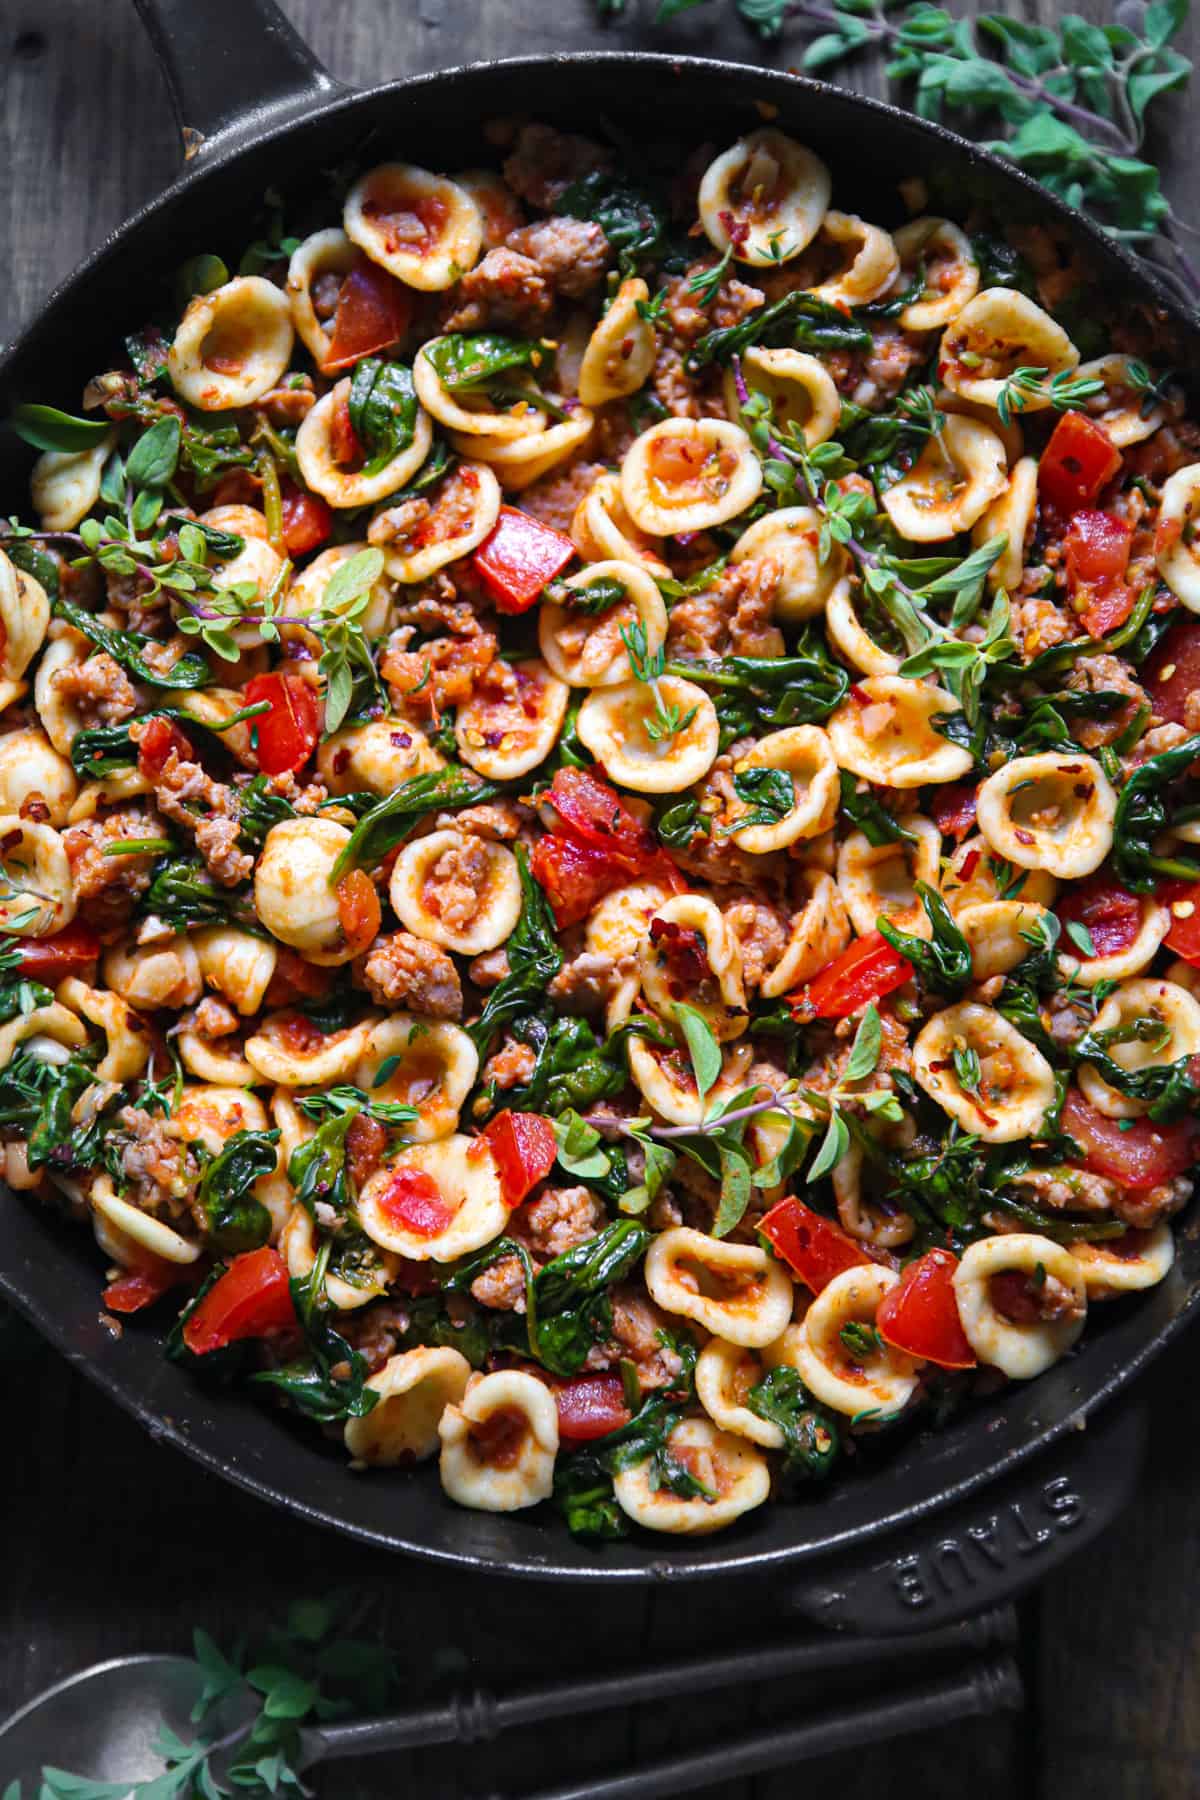 sausage orecchiette with spinach and tomatoes in a cast iron skillet.